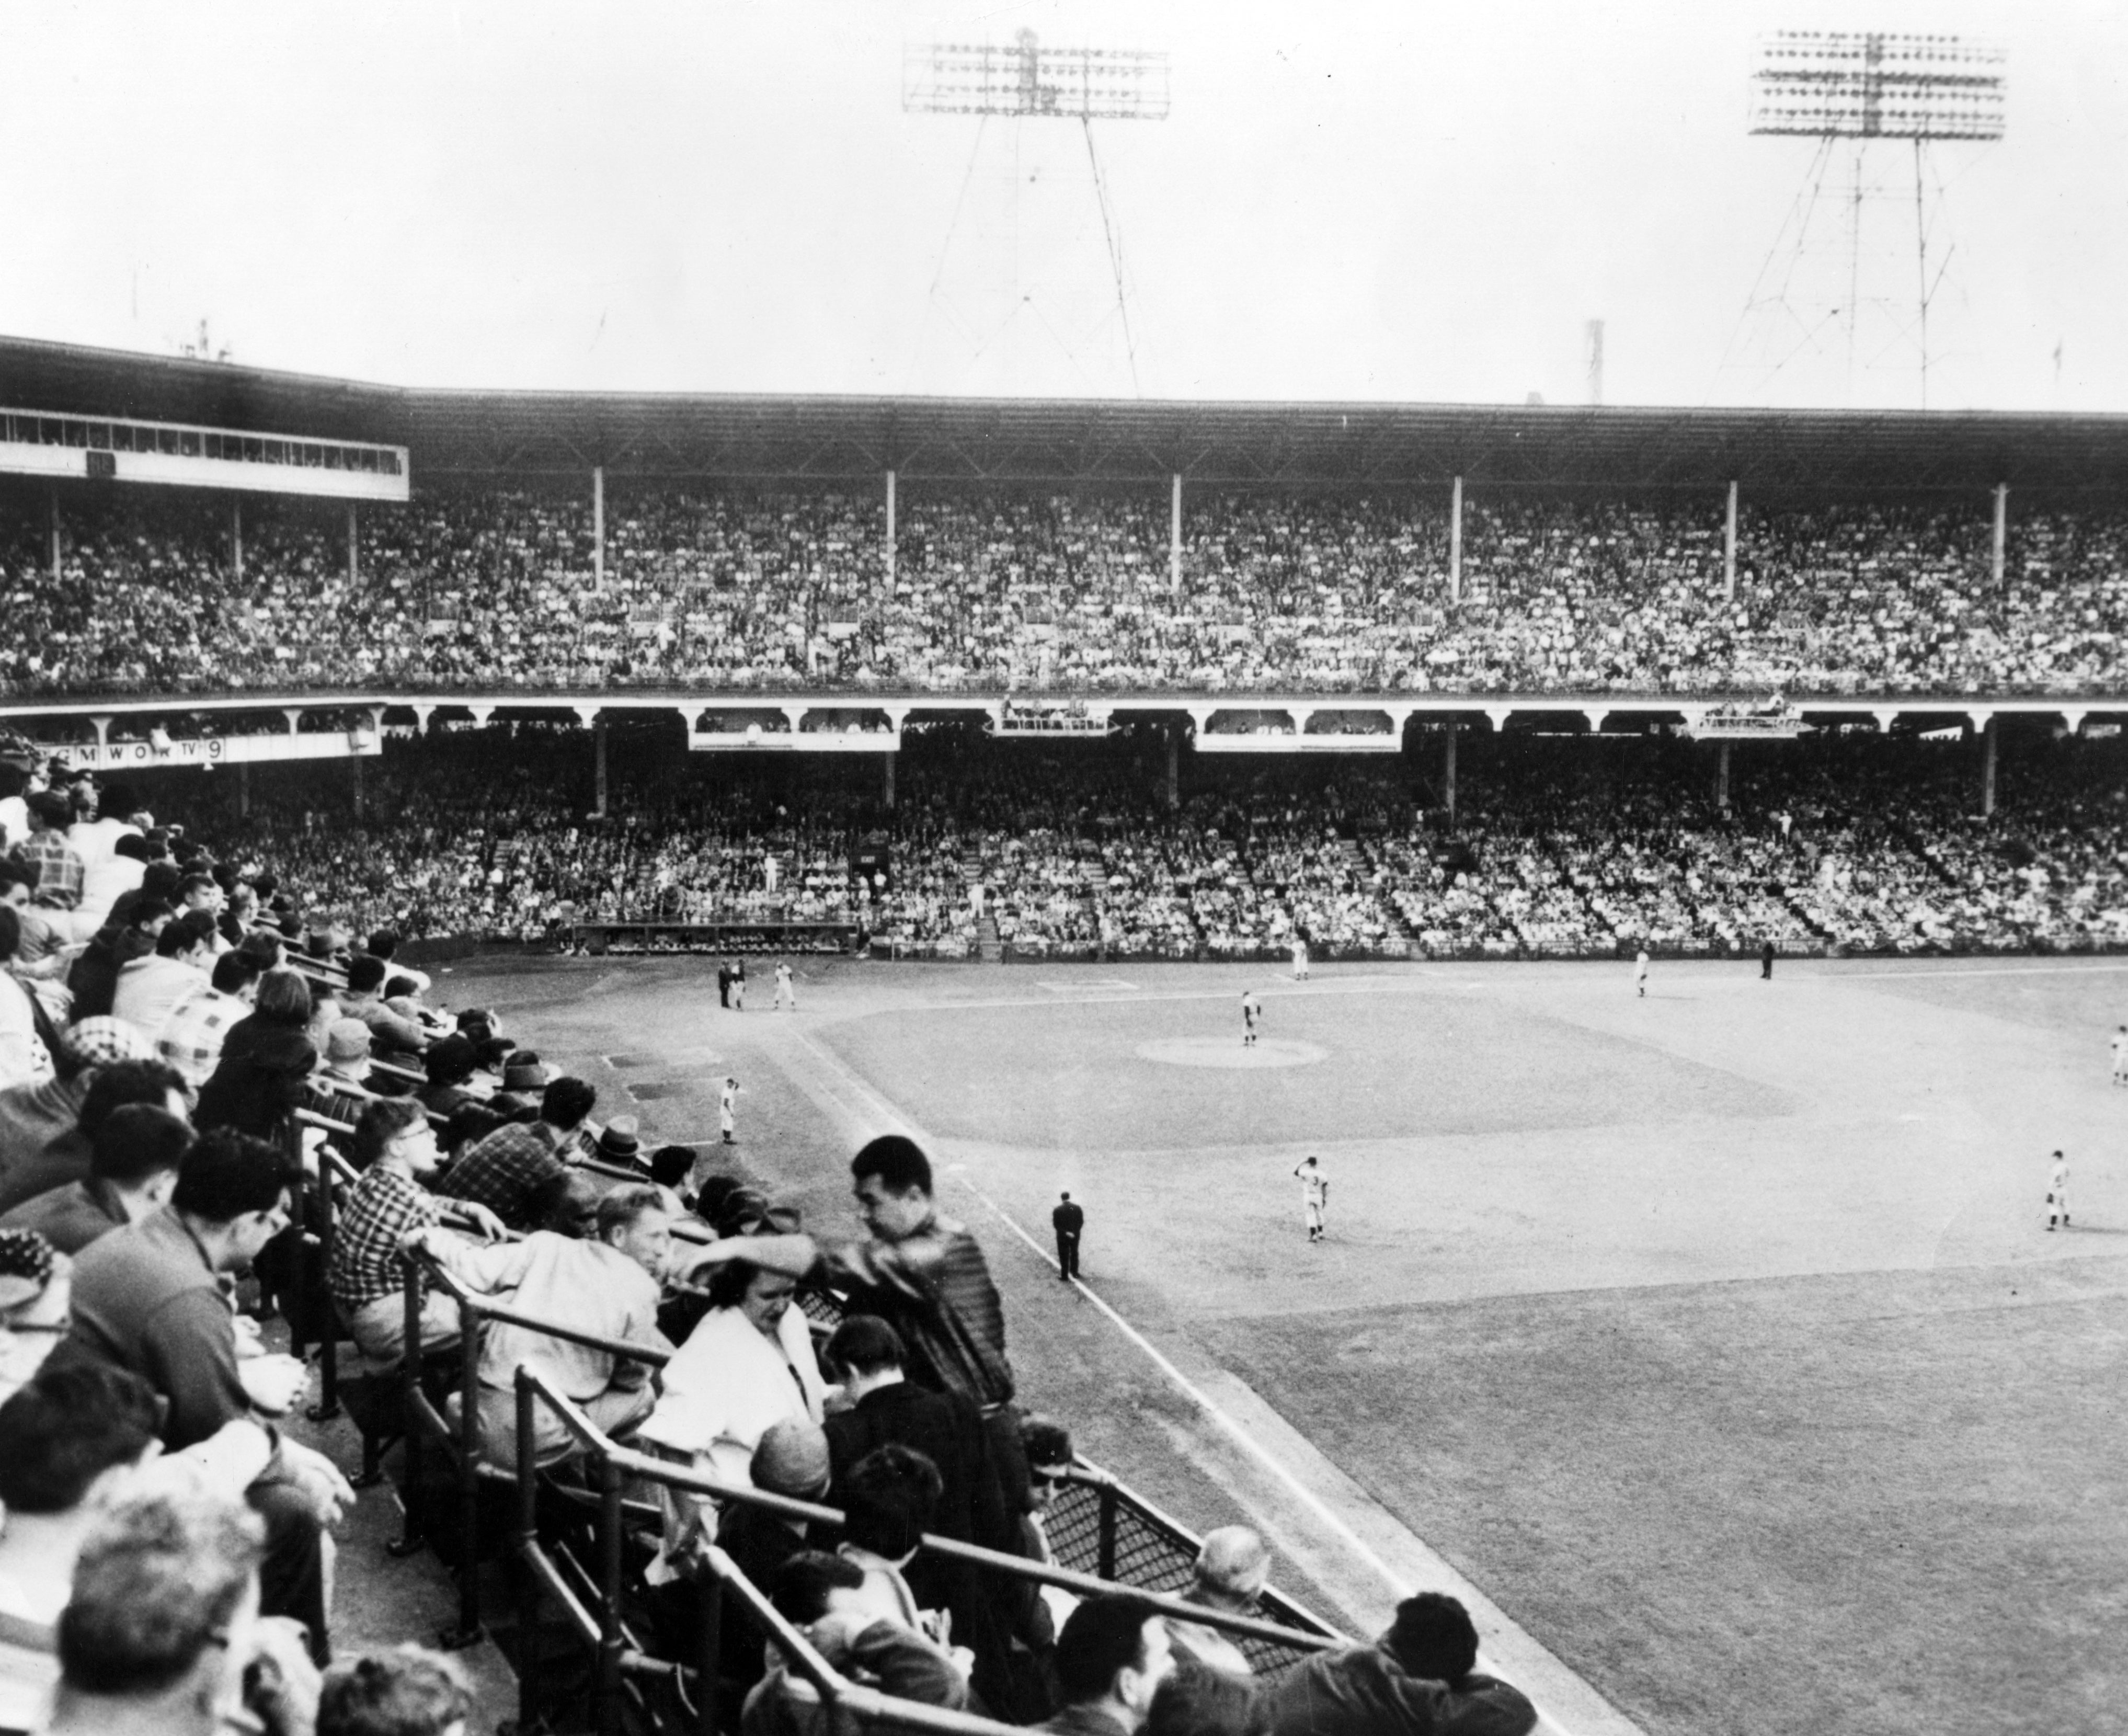 Dodgers win final game at Ebbets Field